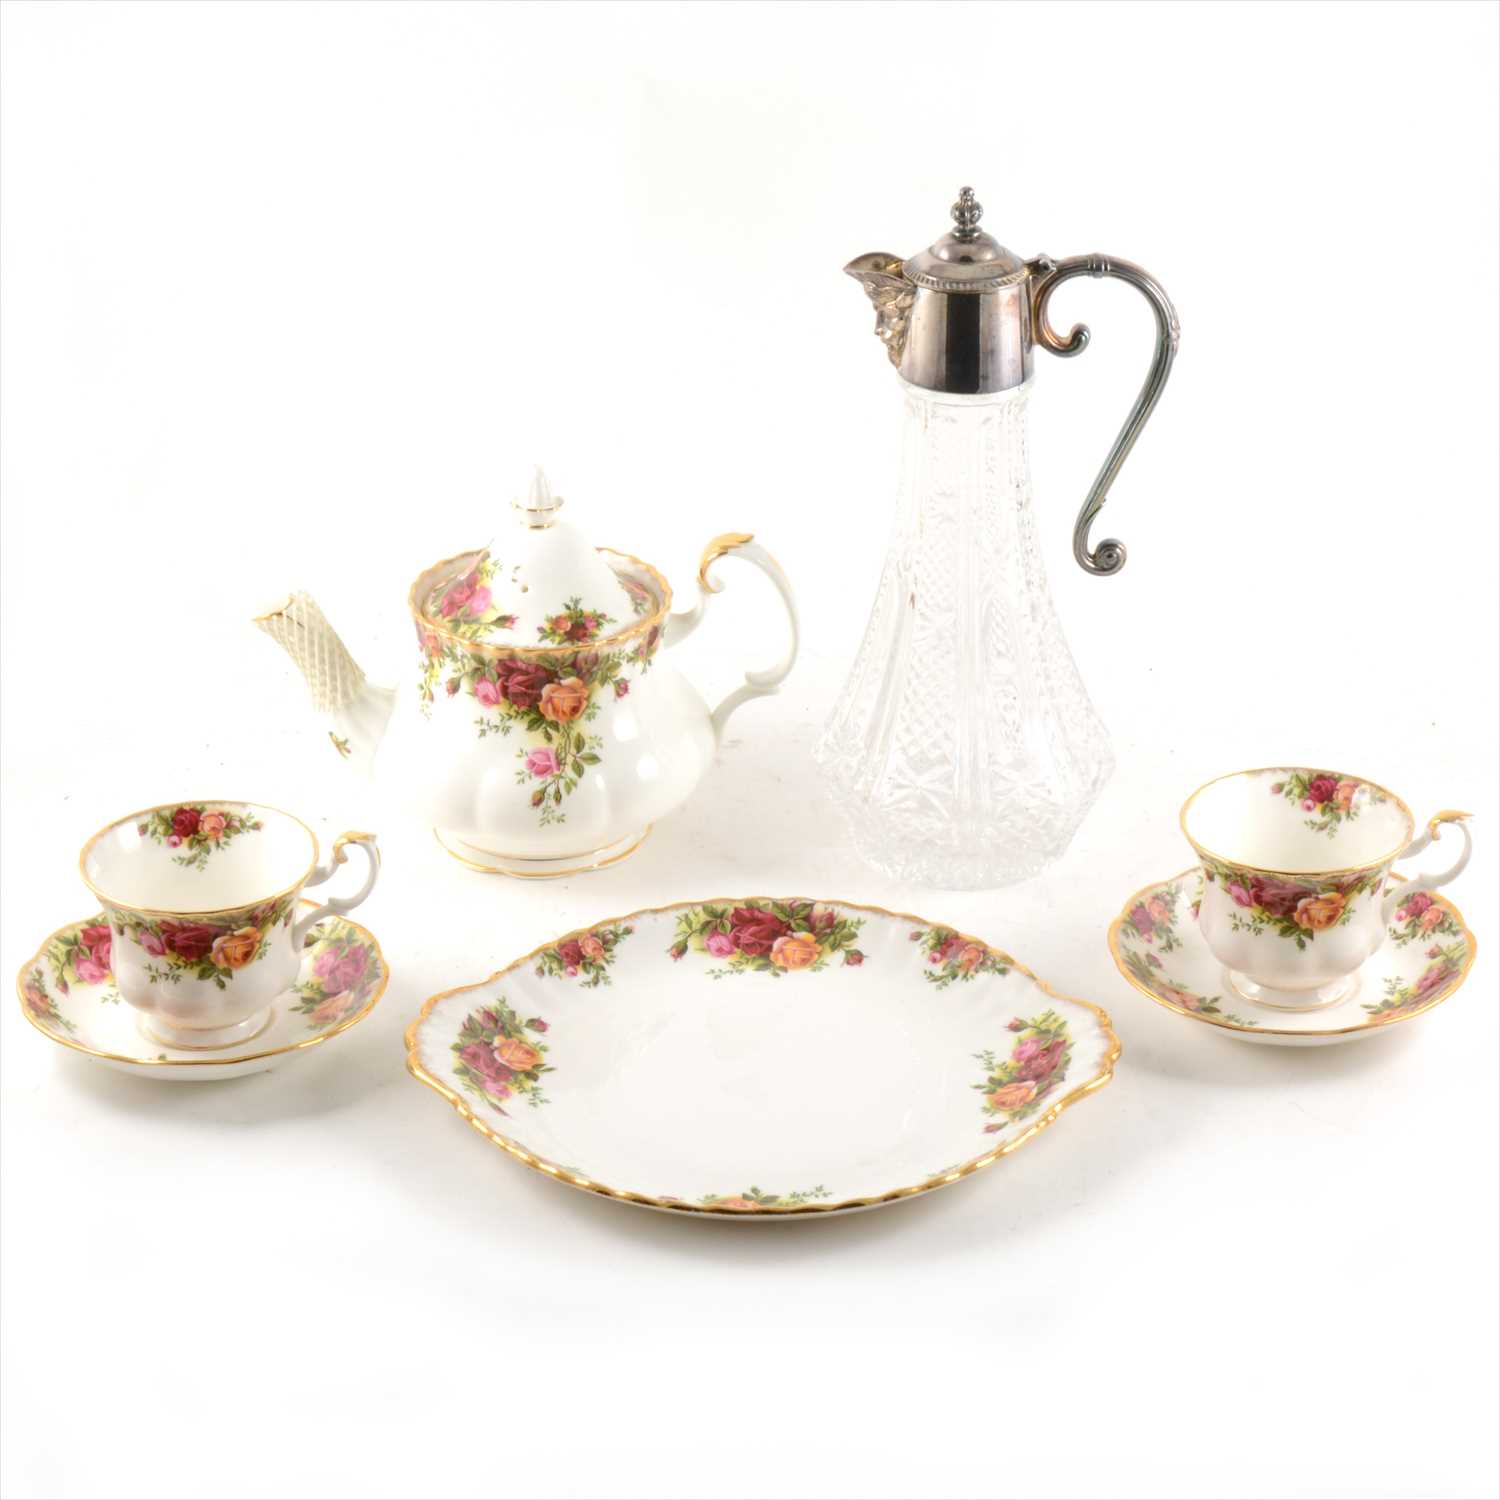 Lot 60 - A Royal Albert tea service, Old Country Roses pattern, and claret jug with silver-plated mounts.